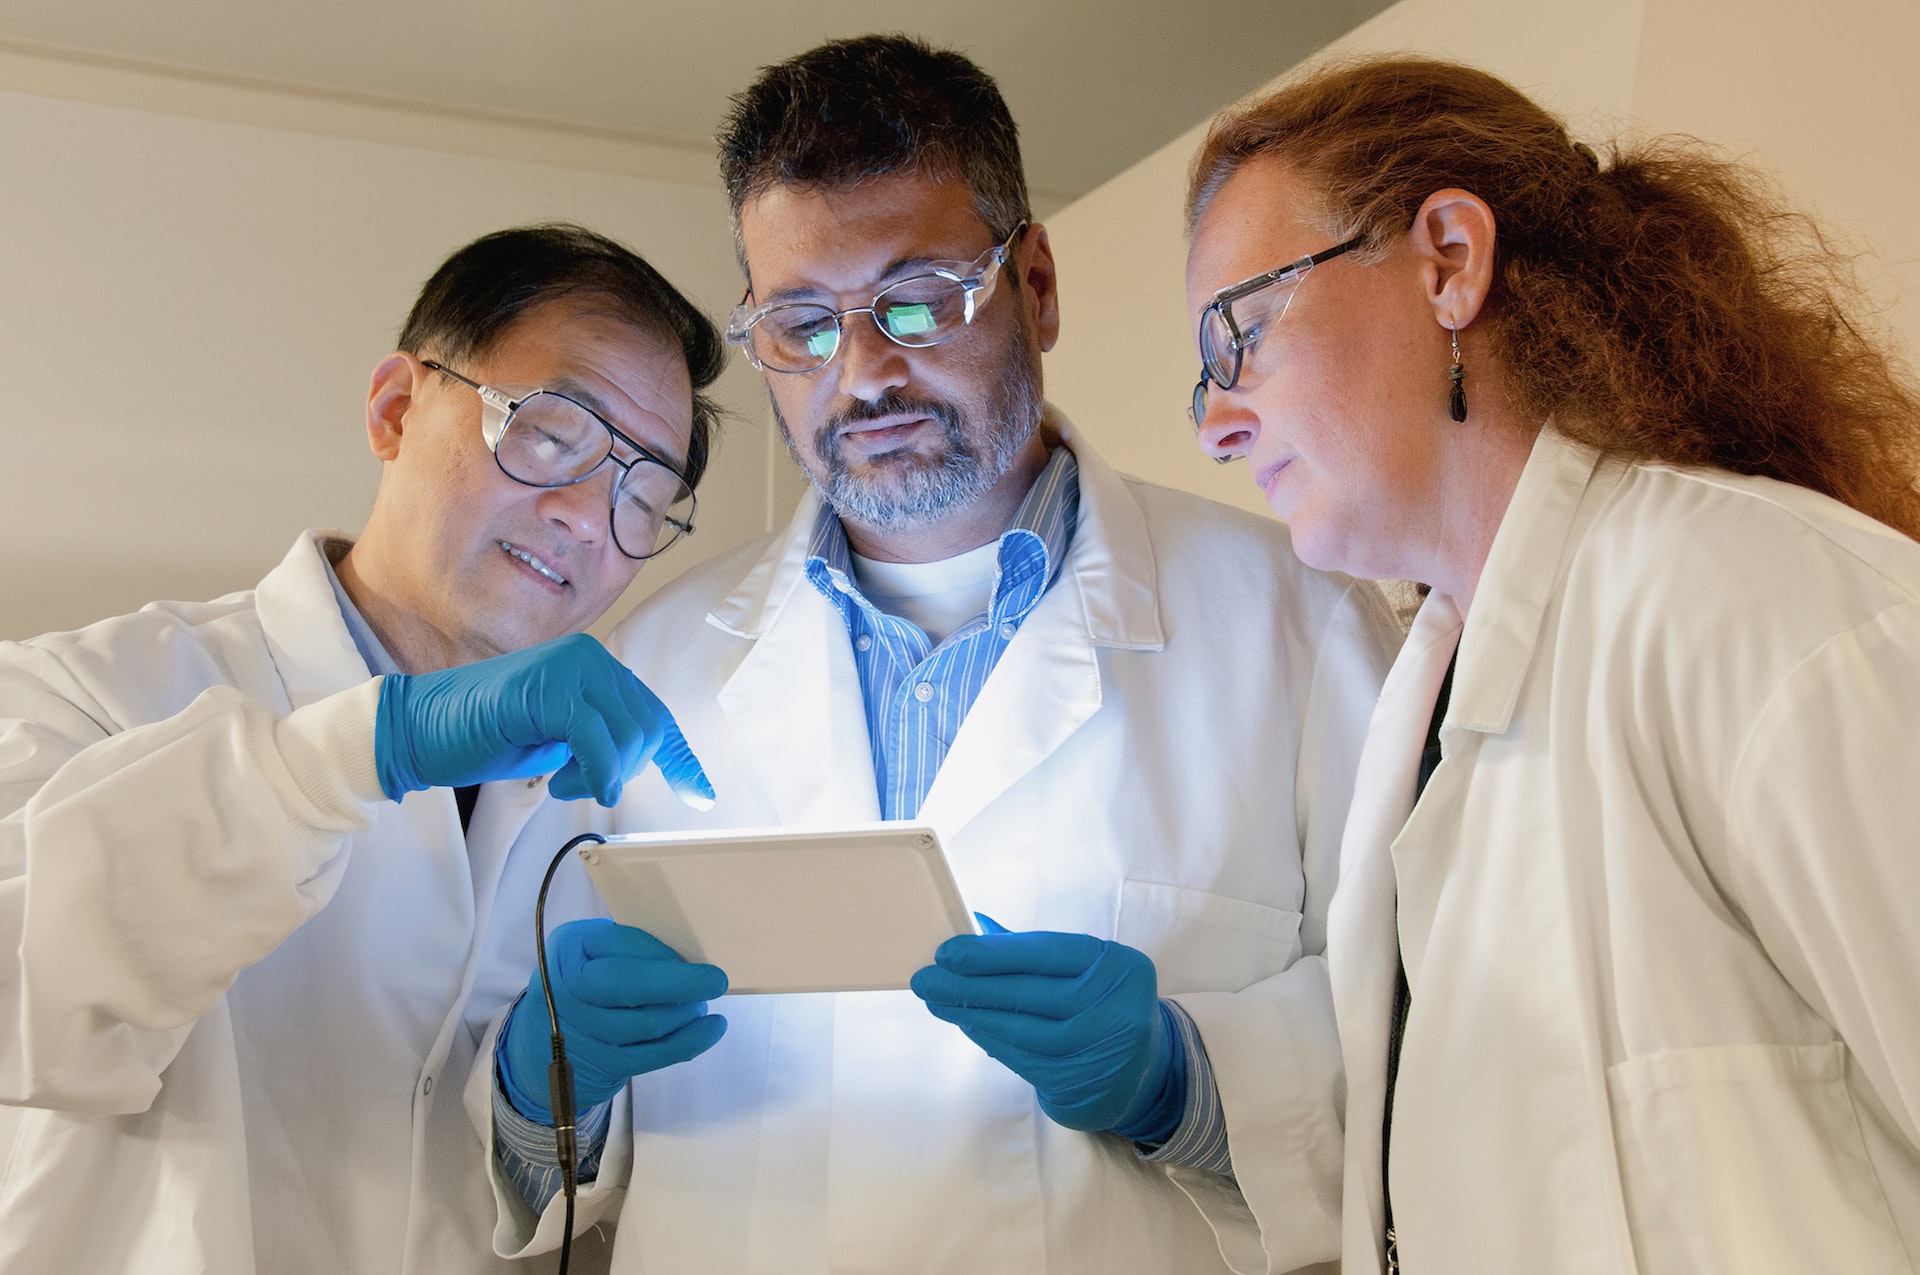 Three researchers in lab coats examining a tablet